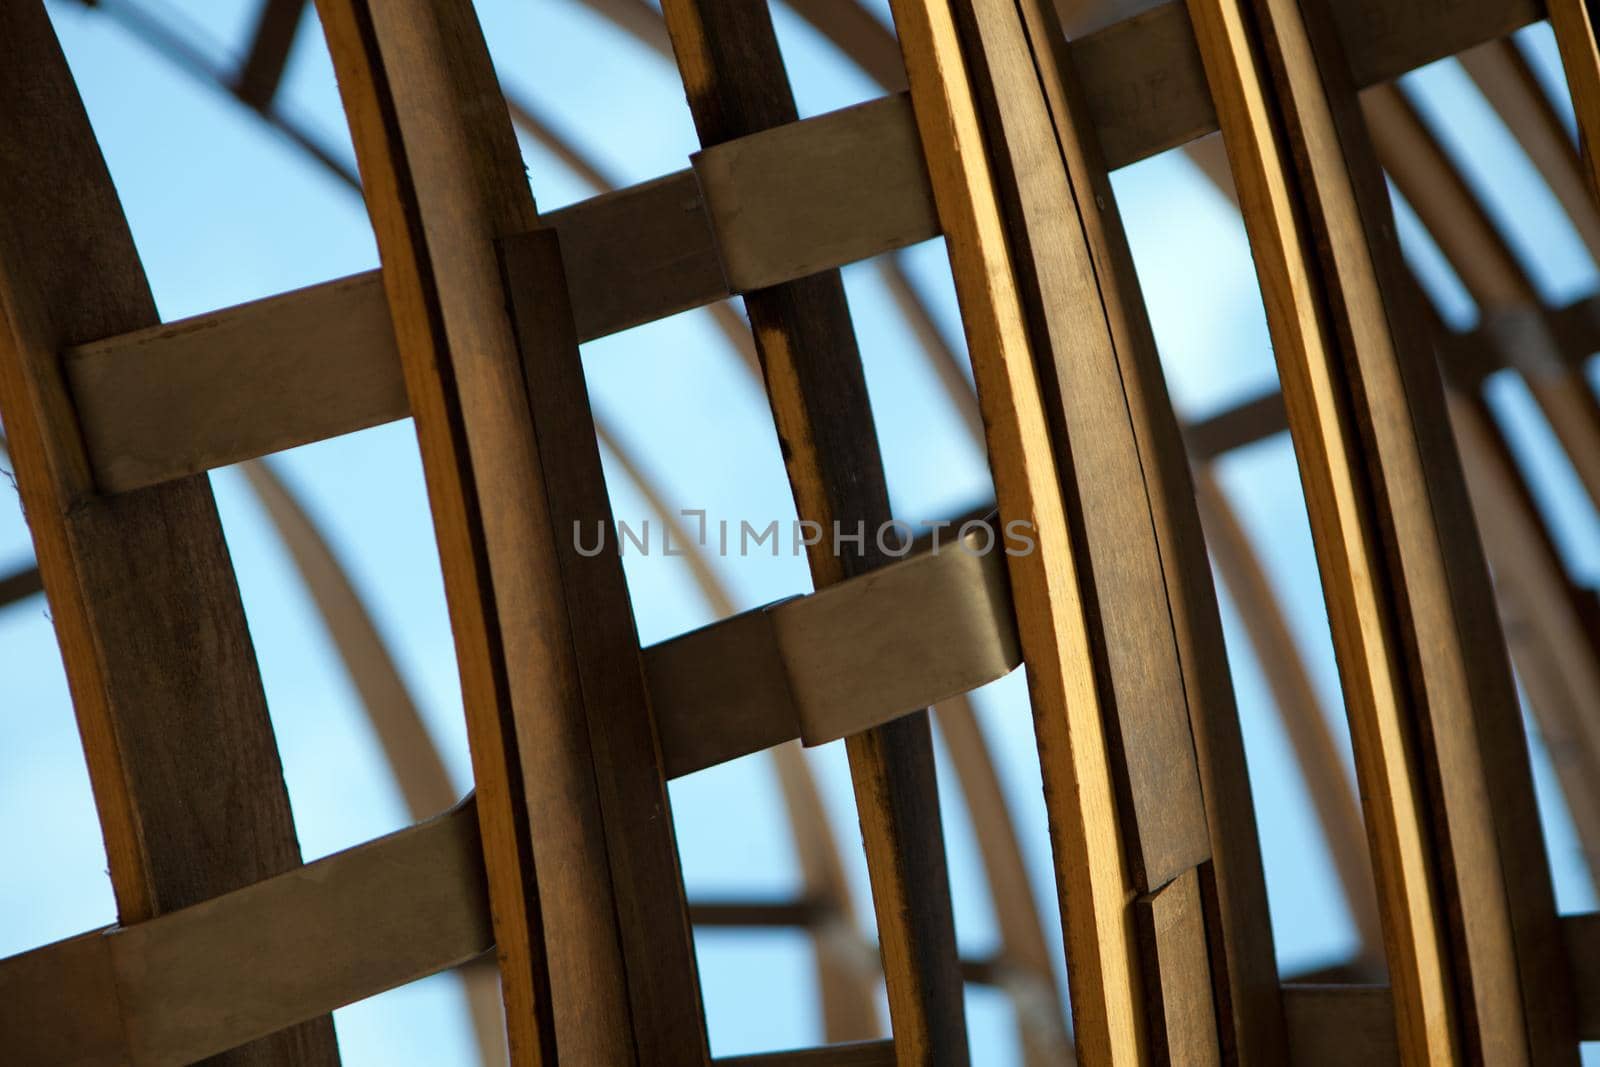 Bend timber details. Wooden striped curving background, abstract design